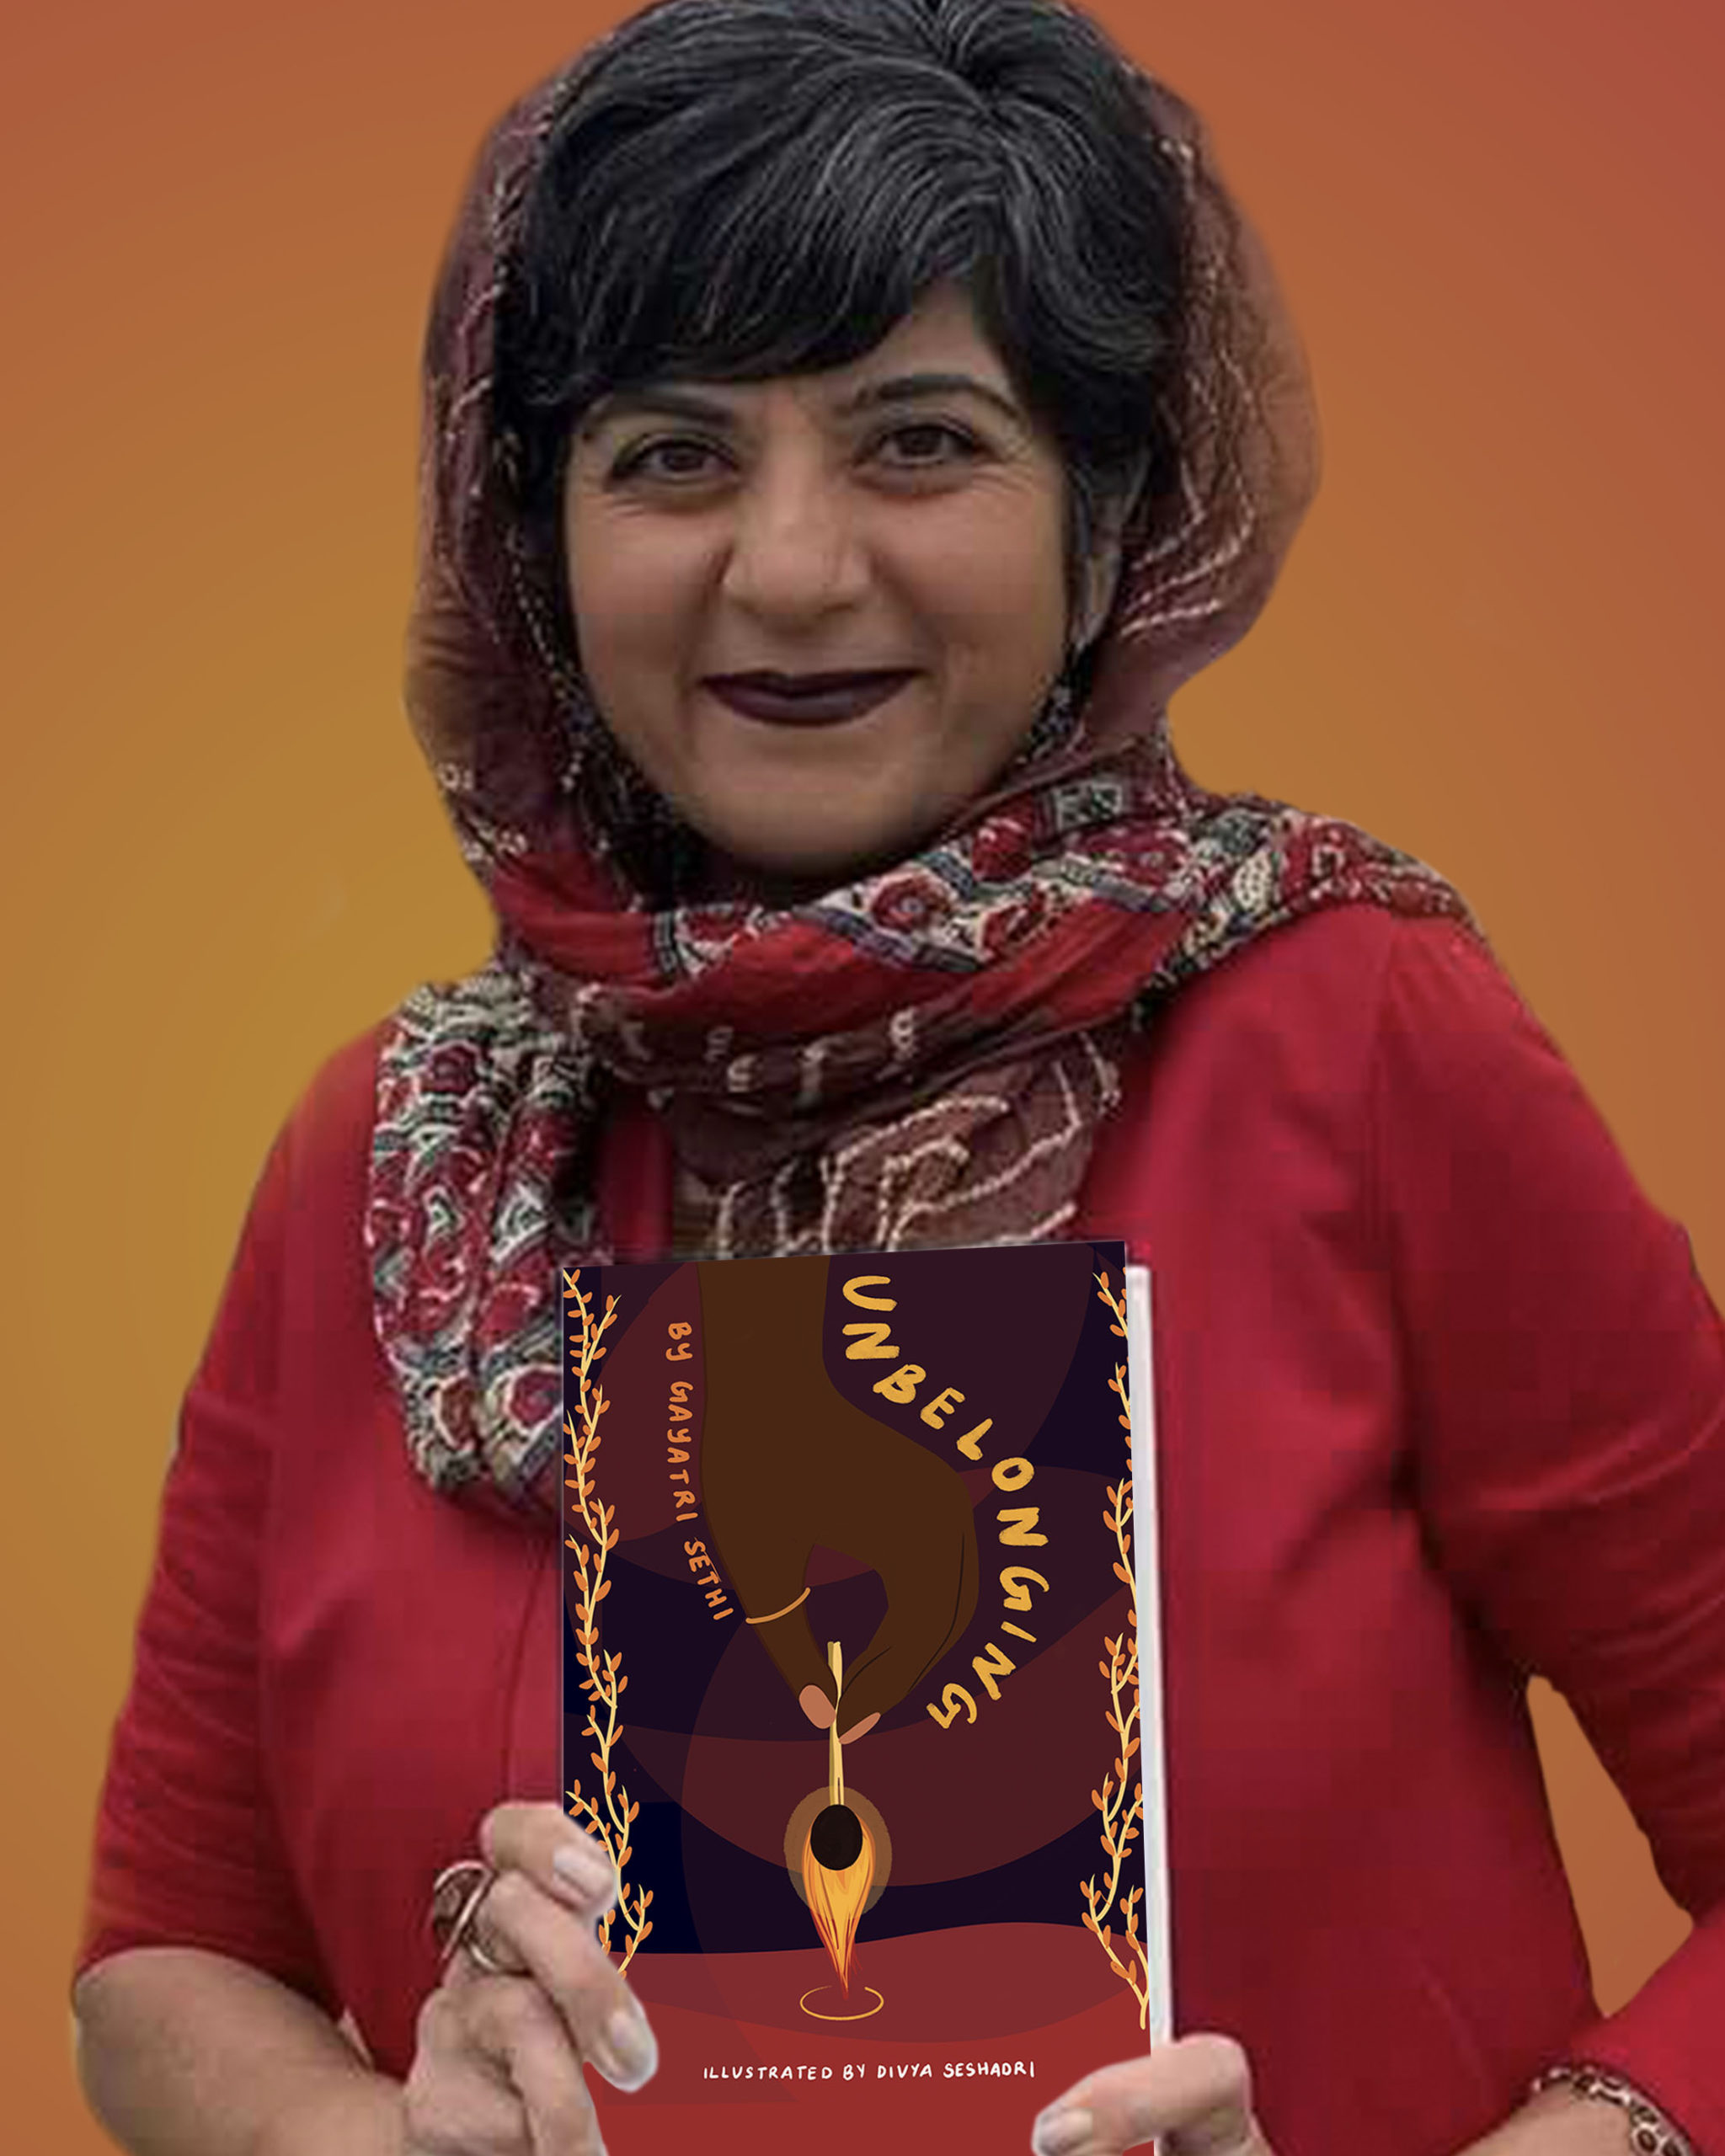 A smiling woman wearing dark lipstick with her hair back in a scarf holding a book titled Unbelonging